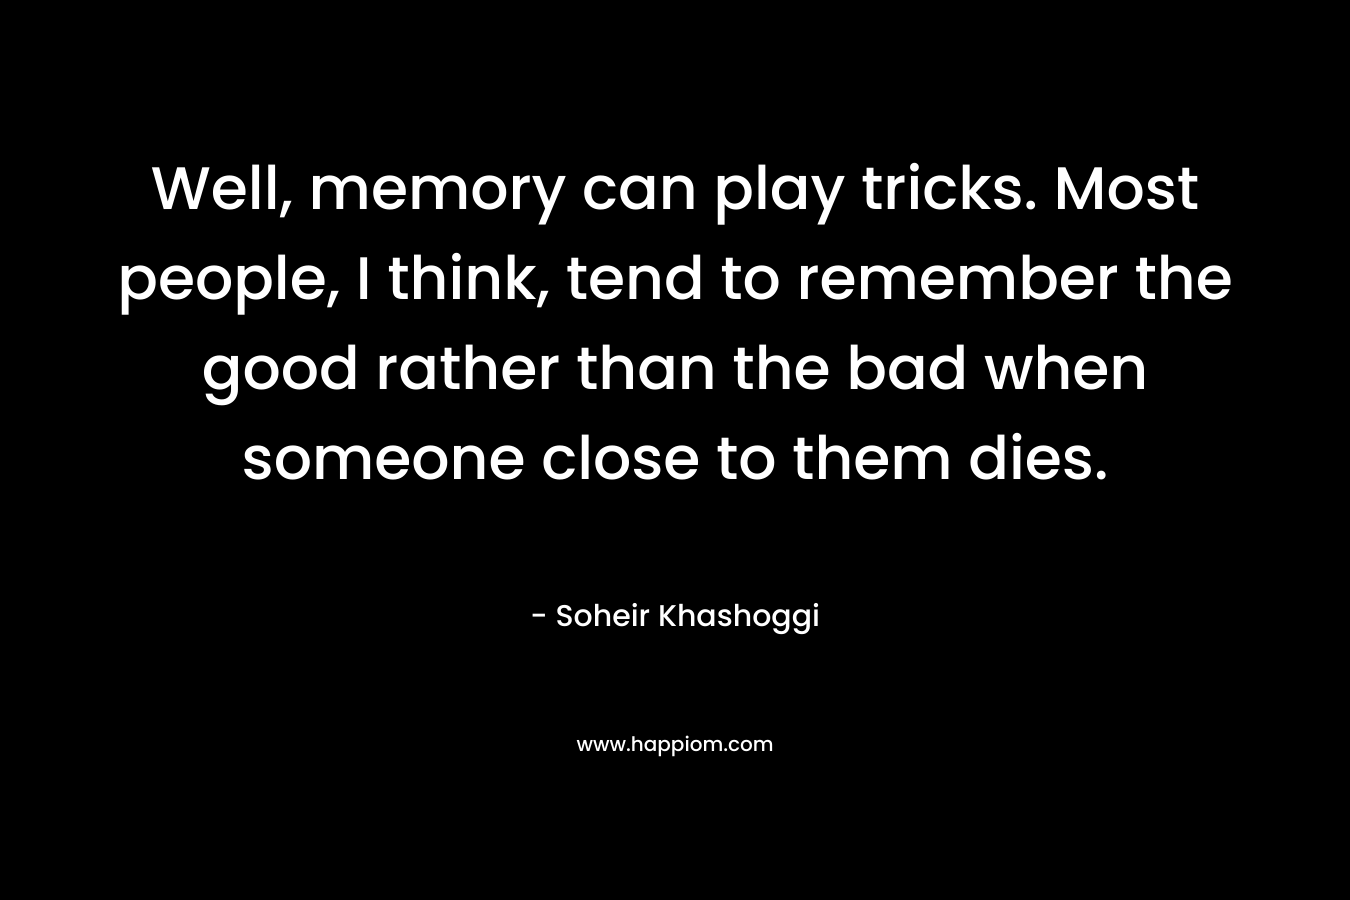 Well, memory can play tricks. Most people, I think, tend to remember the good rather than the bad when someone close to them dies. – Soheir Khashoggi